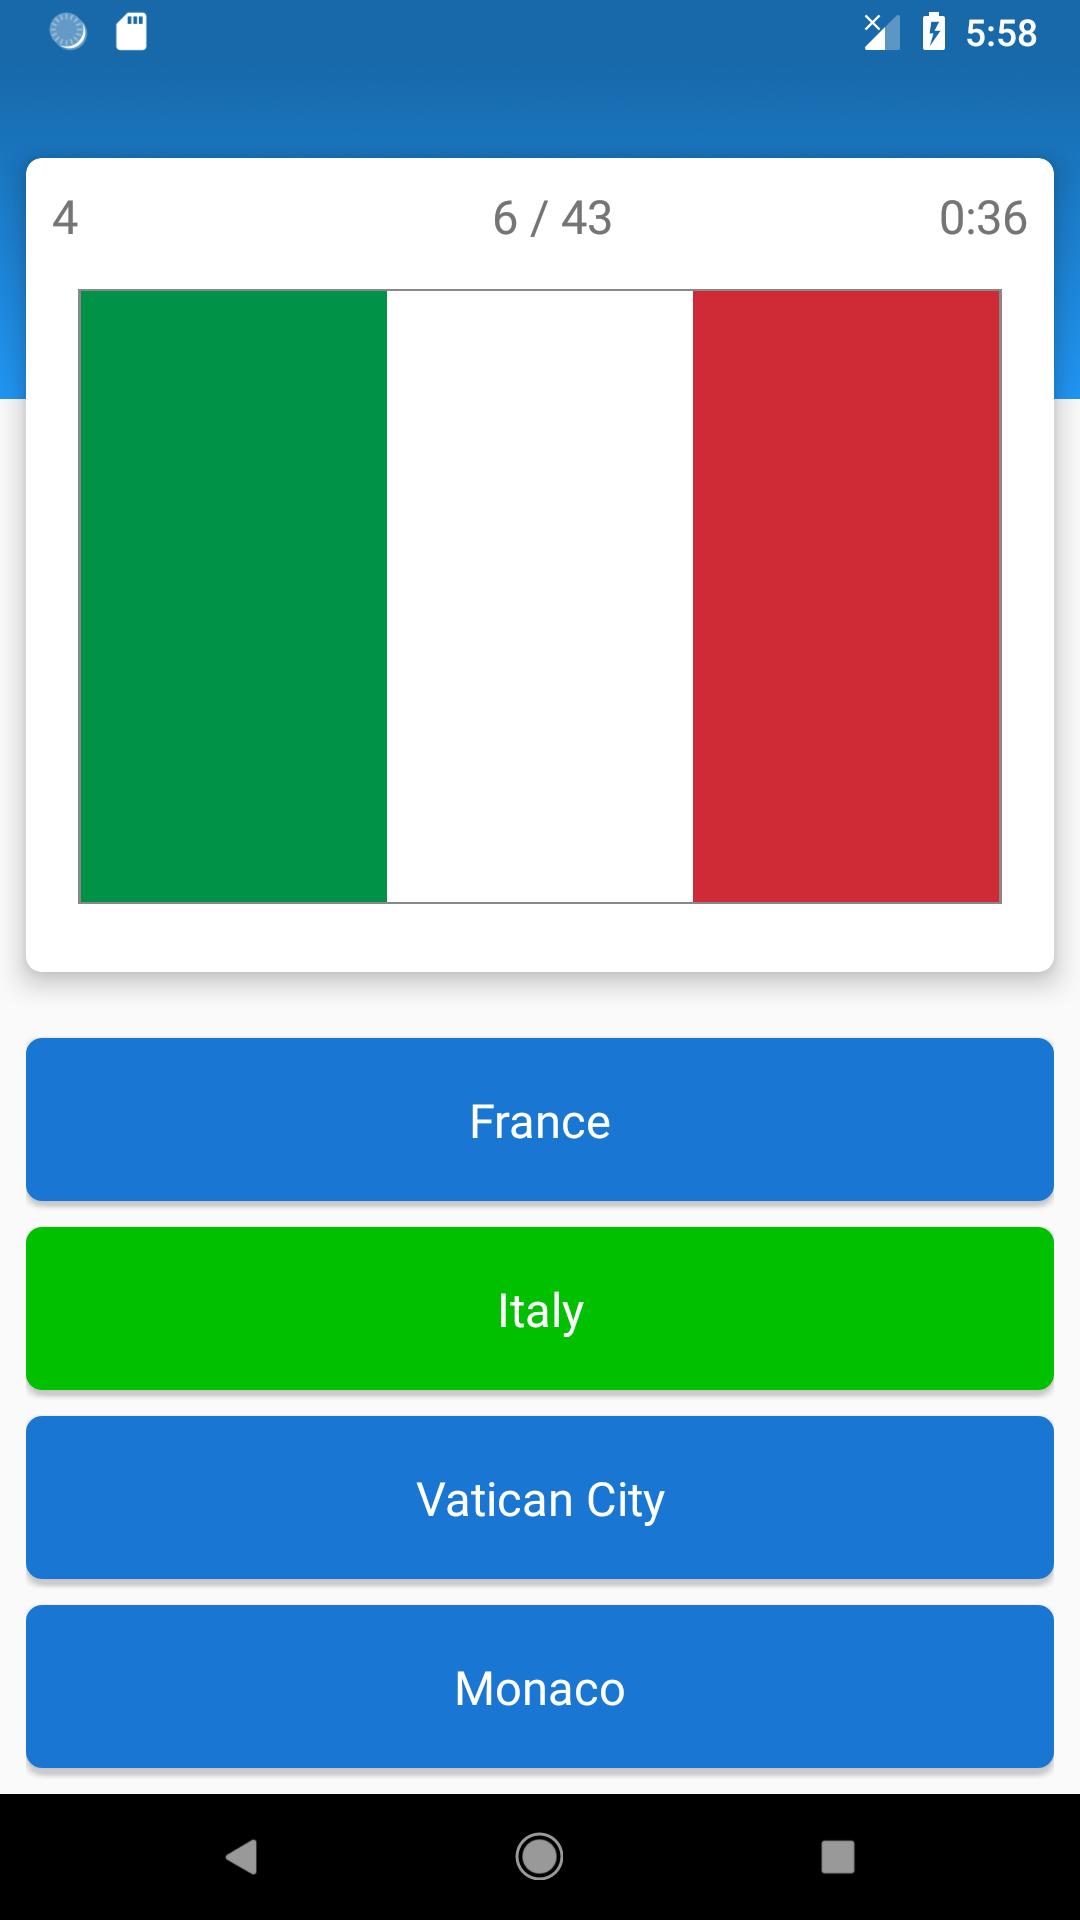 Guess the country! - Quiz capitals and flags for Android - APK Download